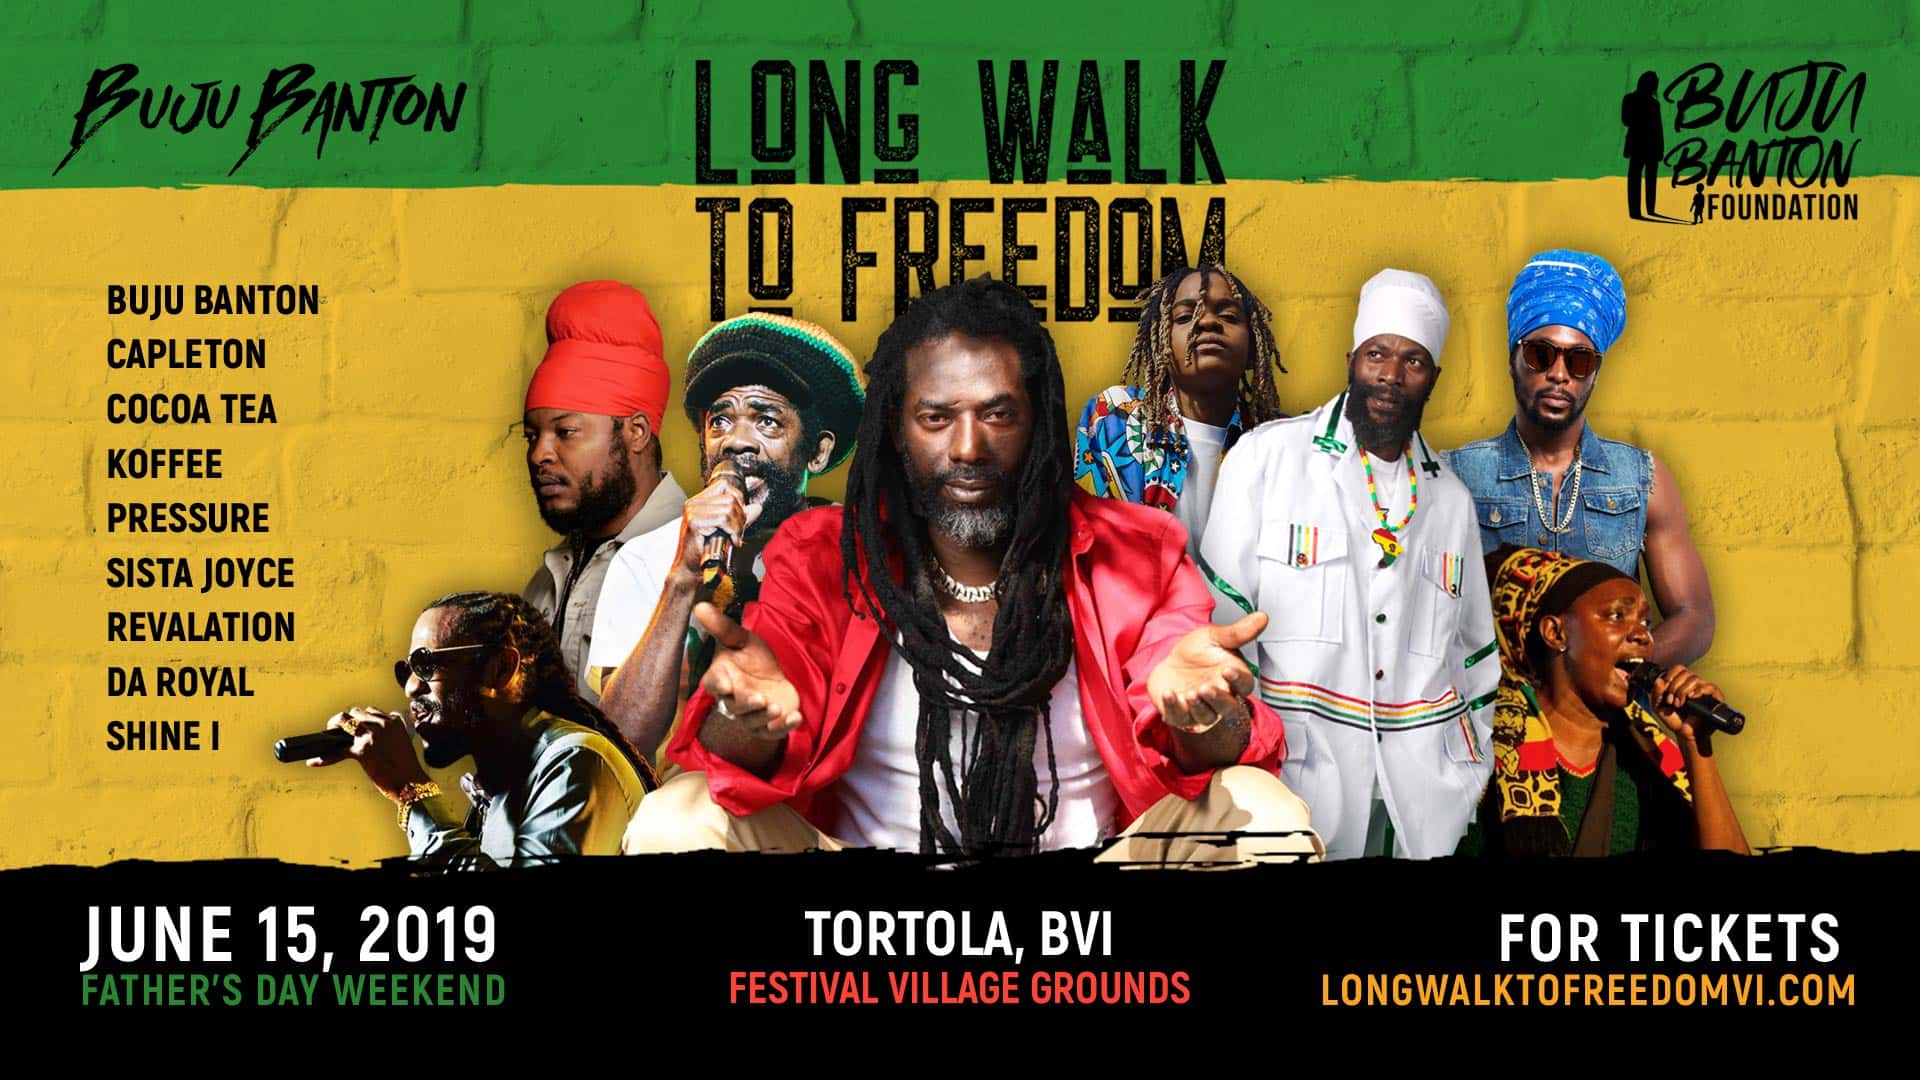 Long Walk to Freedom social media post designed by Victor Bustos